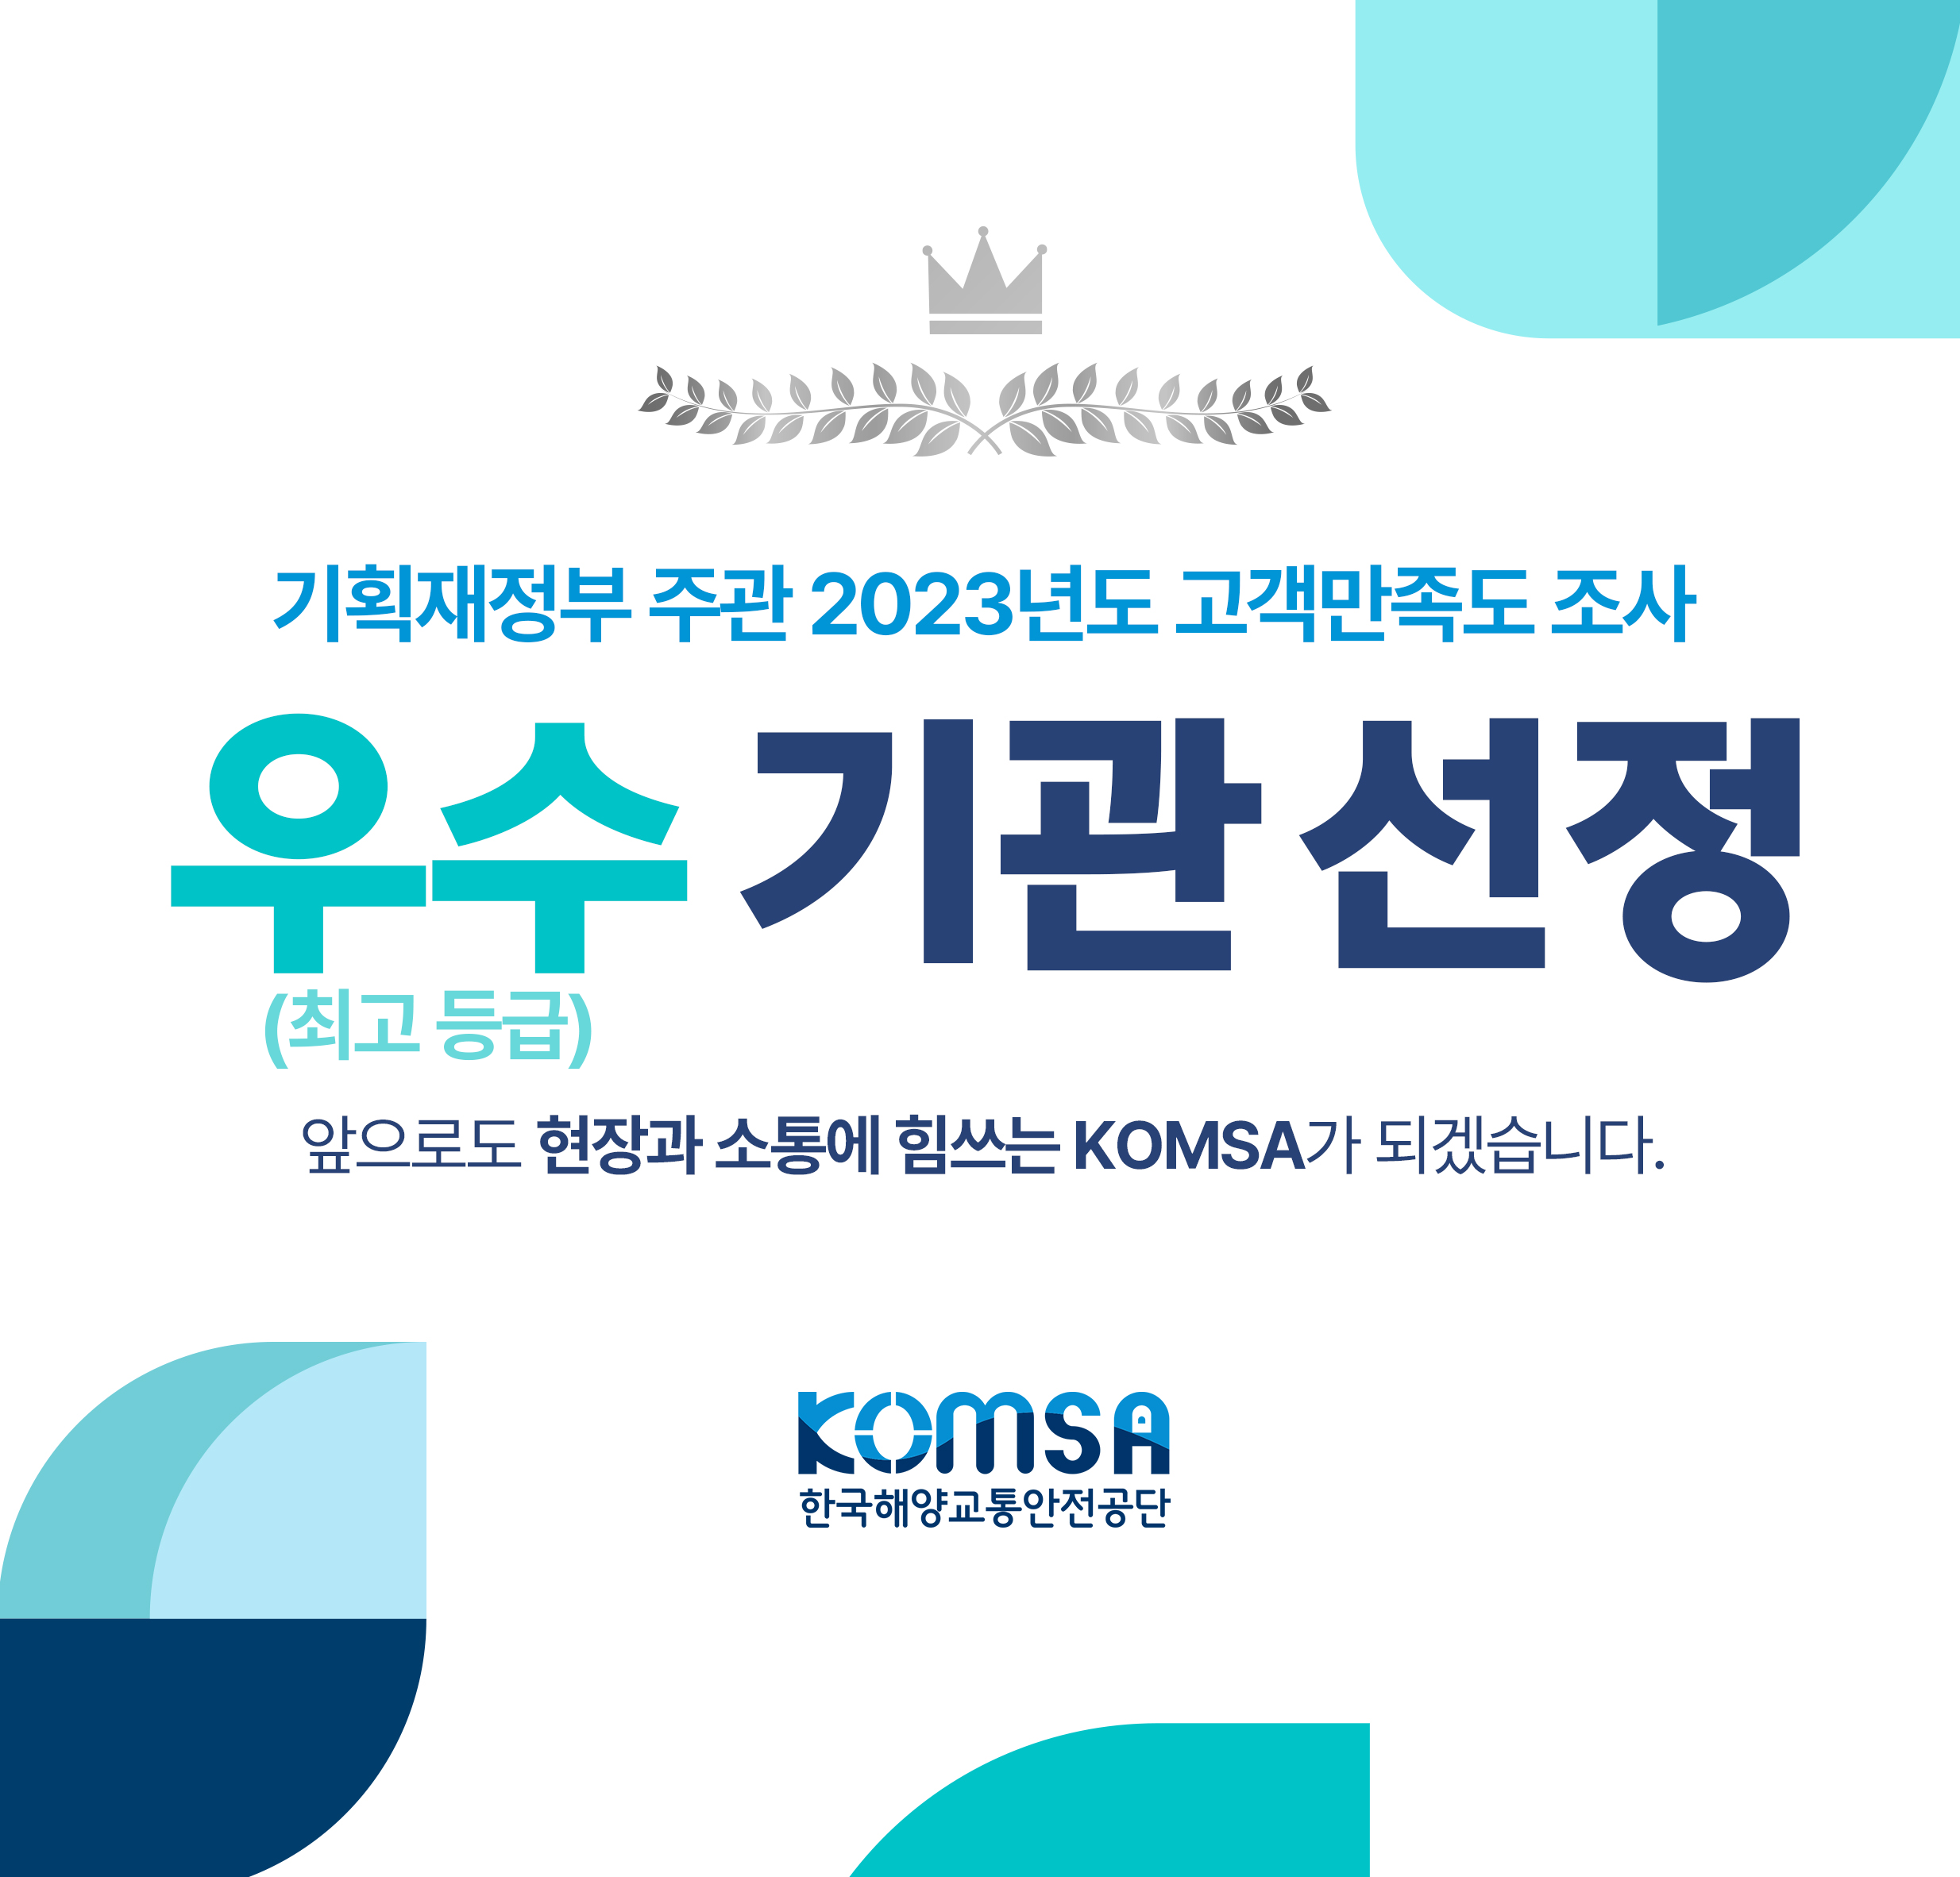 https://www.komsa.or.kr/kor/;jsessionid=BF4BE59084809B5E04A8196A2A234CFE